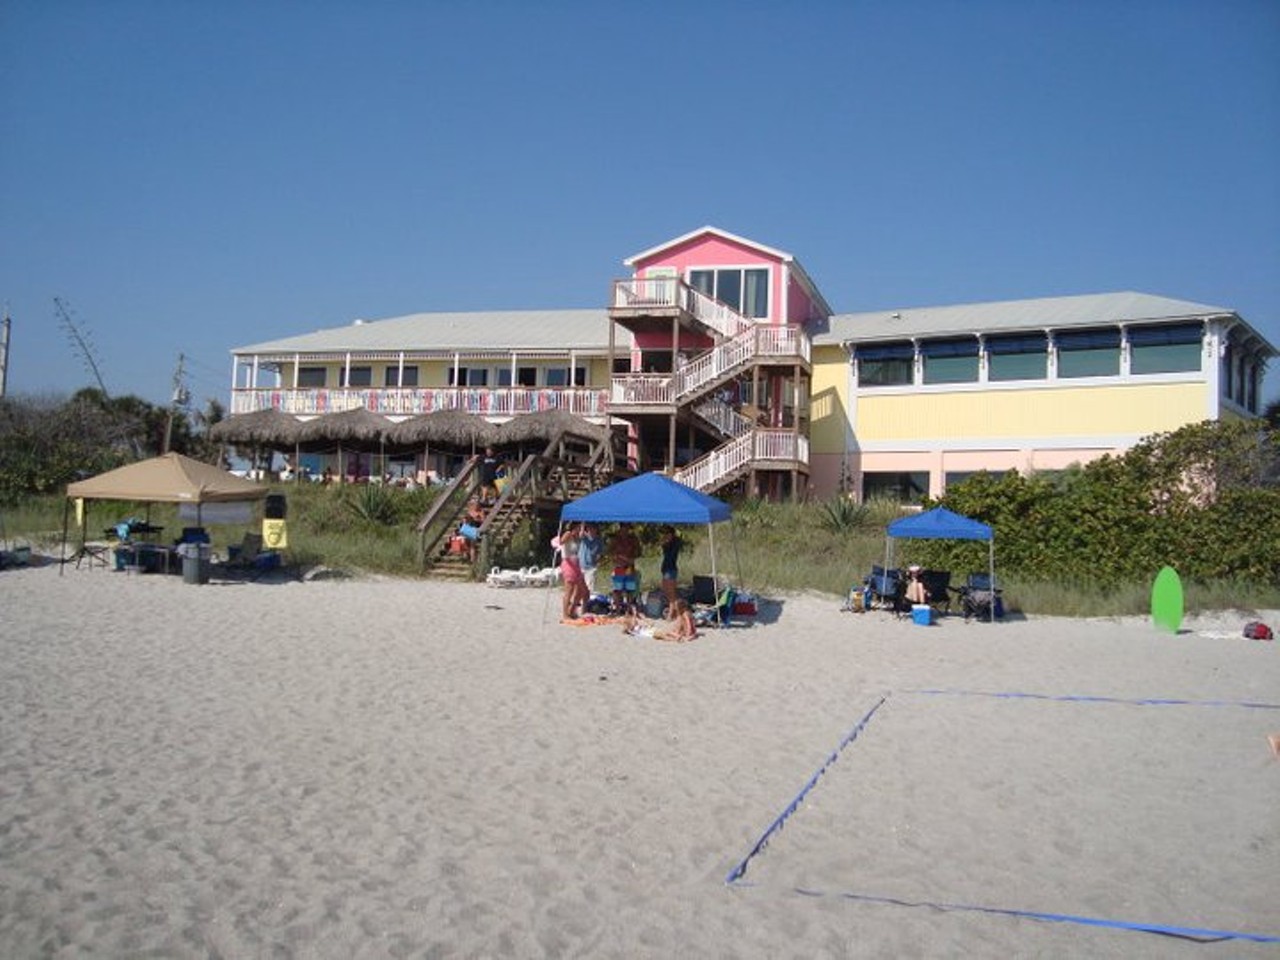 Sand on the Beach Bar and Grill
1005 Atlantic St., Melbourne Beach, 321-327-8951 
Sand on the Beach is a place to grab drinks and a bite to eat. After a quick swim or tan, one can choose from a variety of seafood, along with chicken, pork, and brisket options. Happy hour runs everyday from 11 a.m. to 7 p.m., and the fun continues with a monthly Full Moon Party with live music and drink specials. 
Photo via Sand on the Beach/Facebook